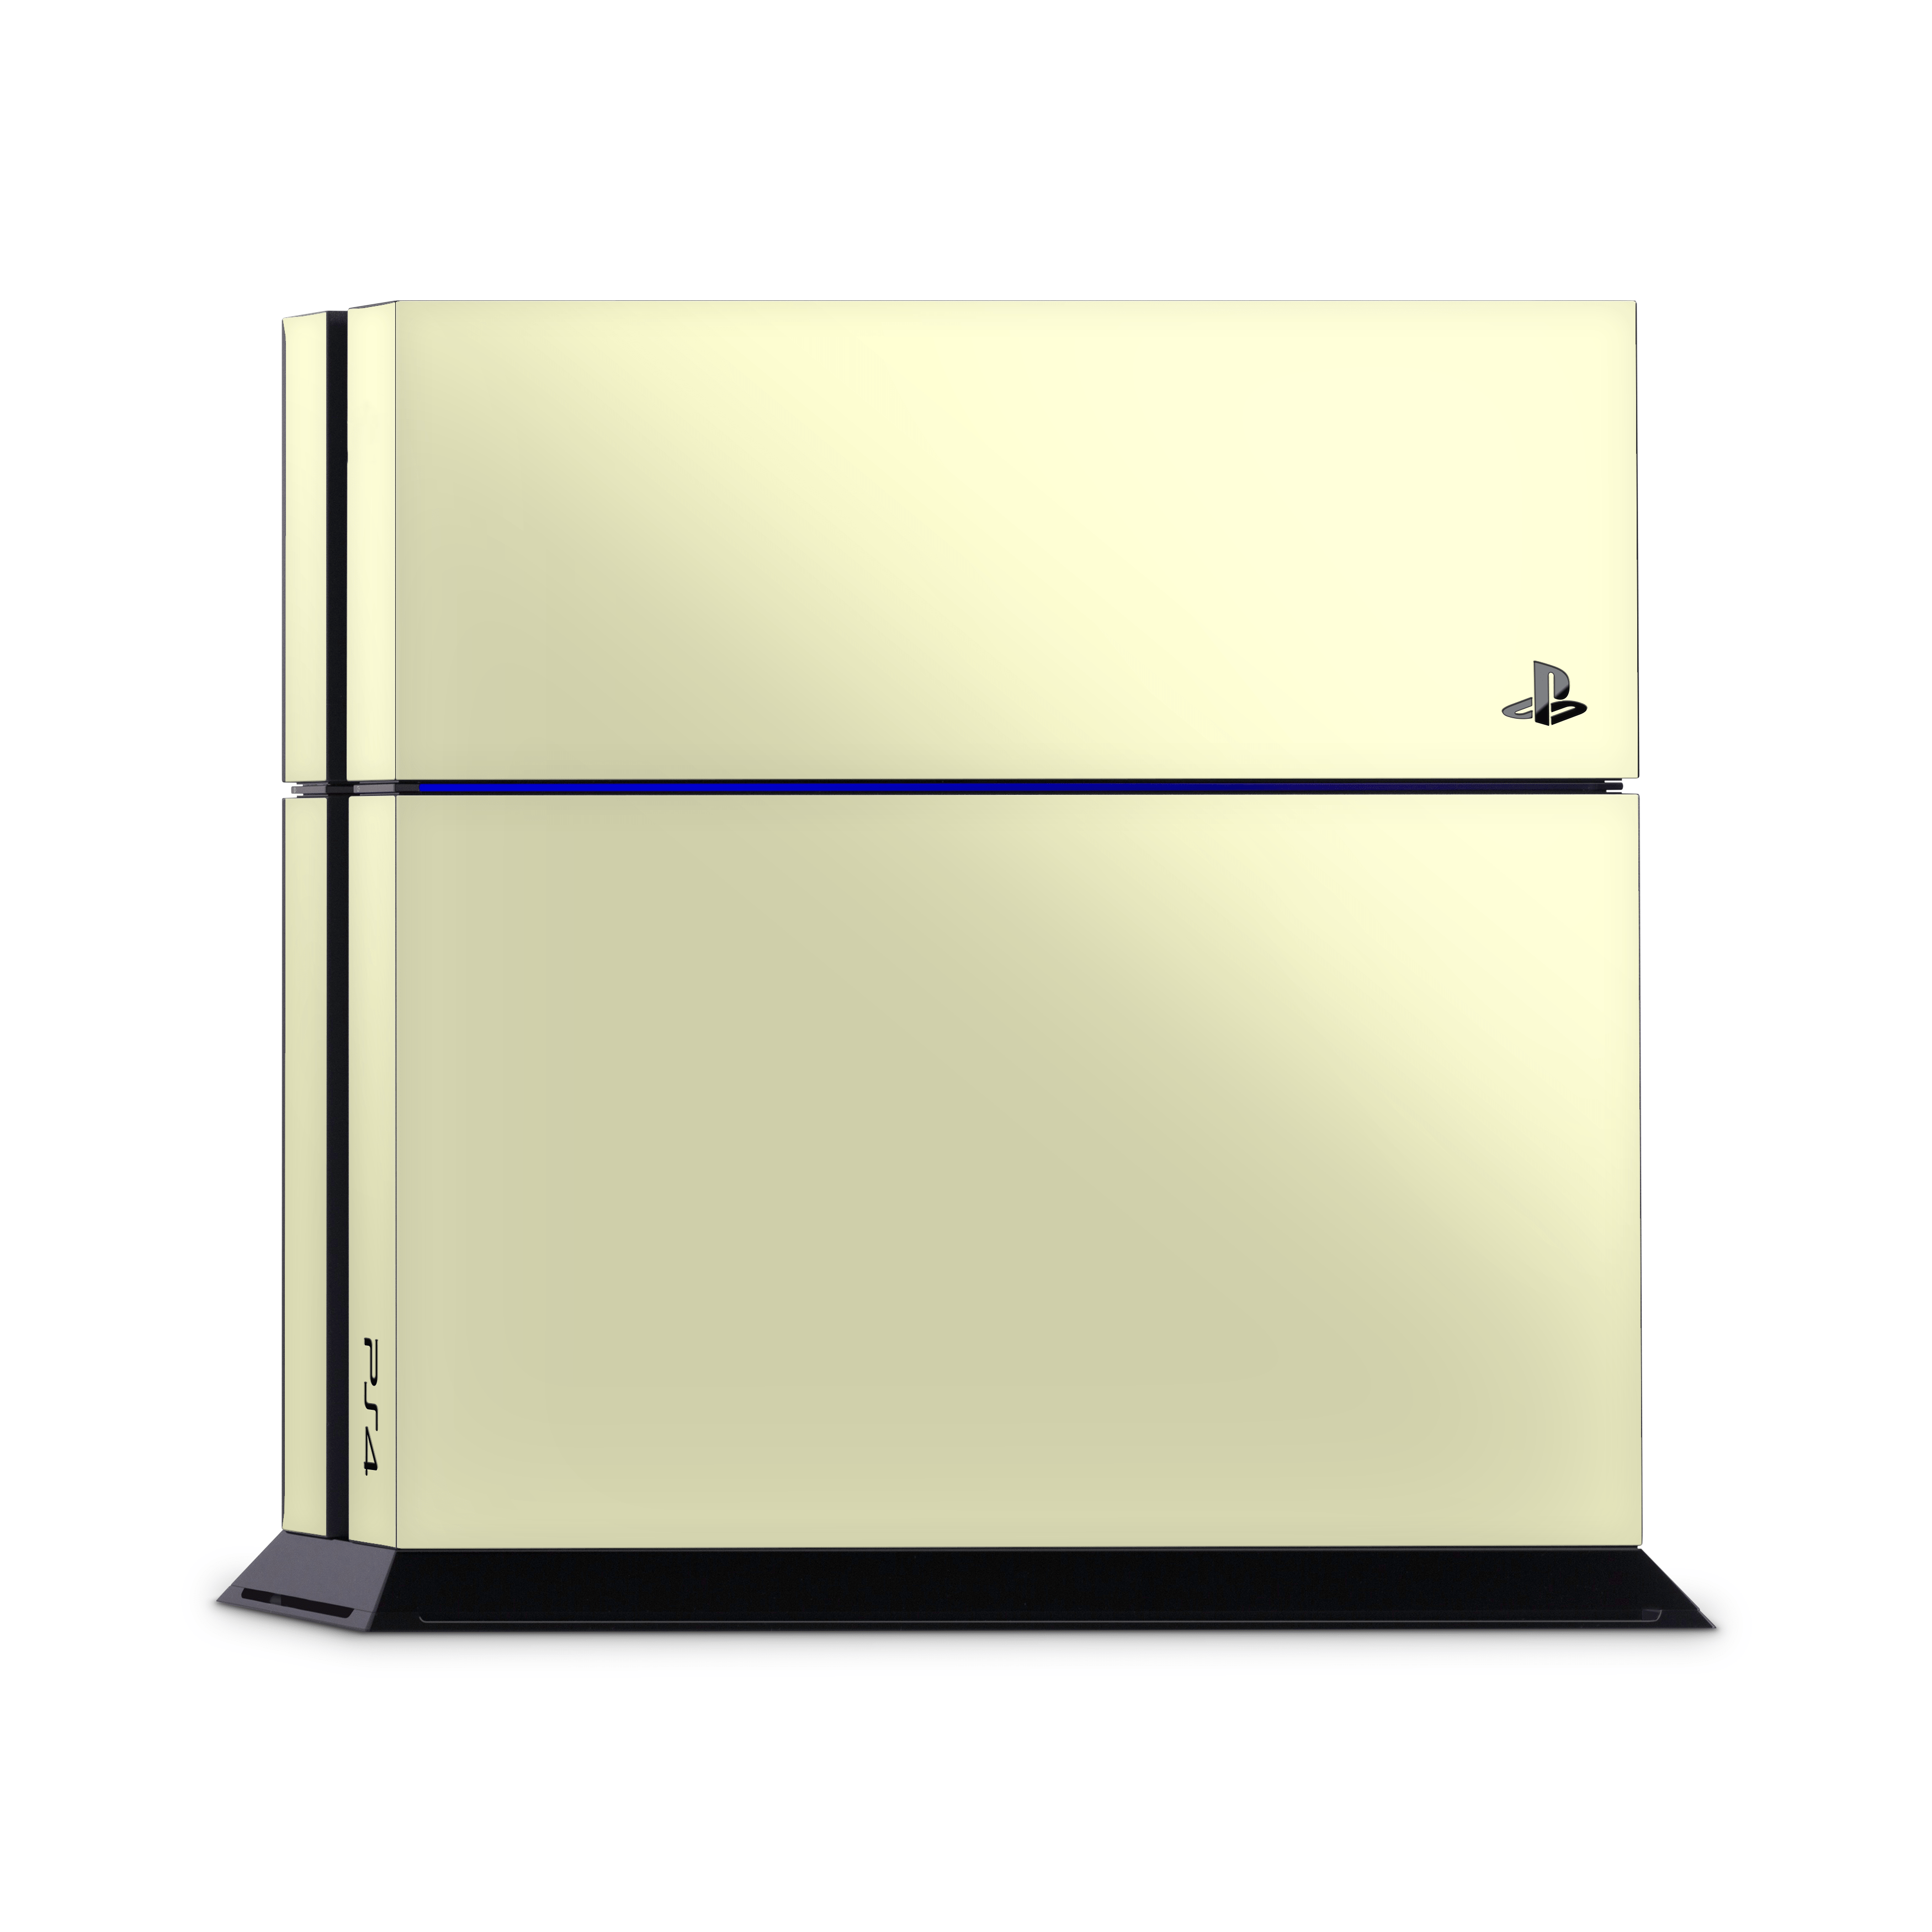 Eggy Yellow PS4 | PS4 Pro | PS4 Slim Skins